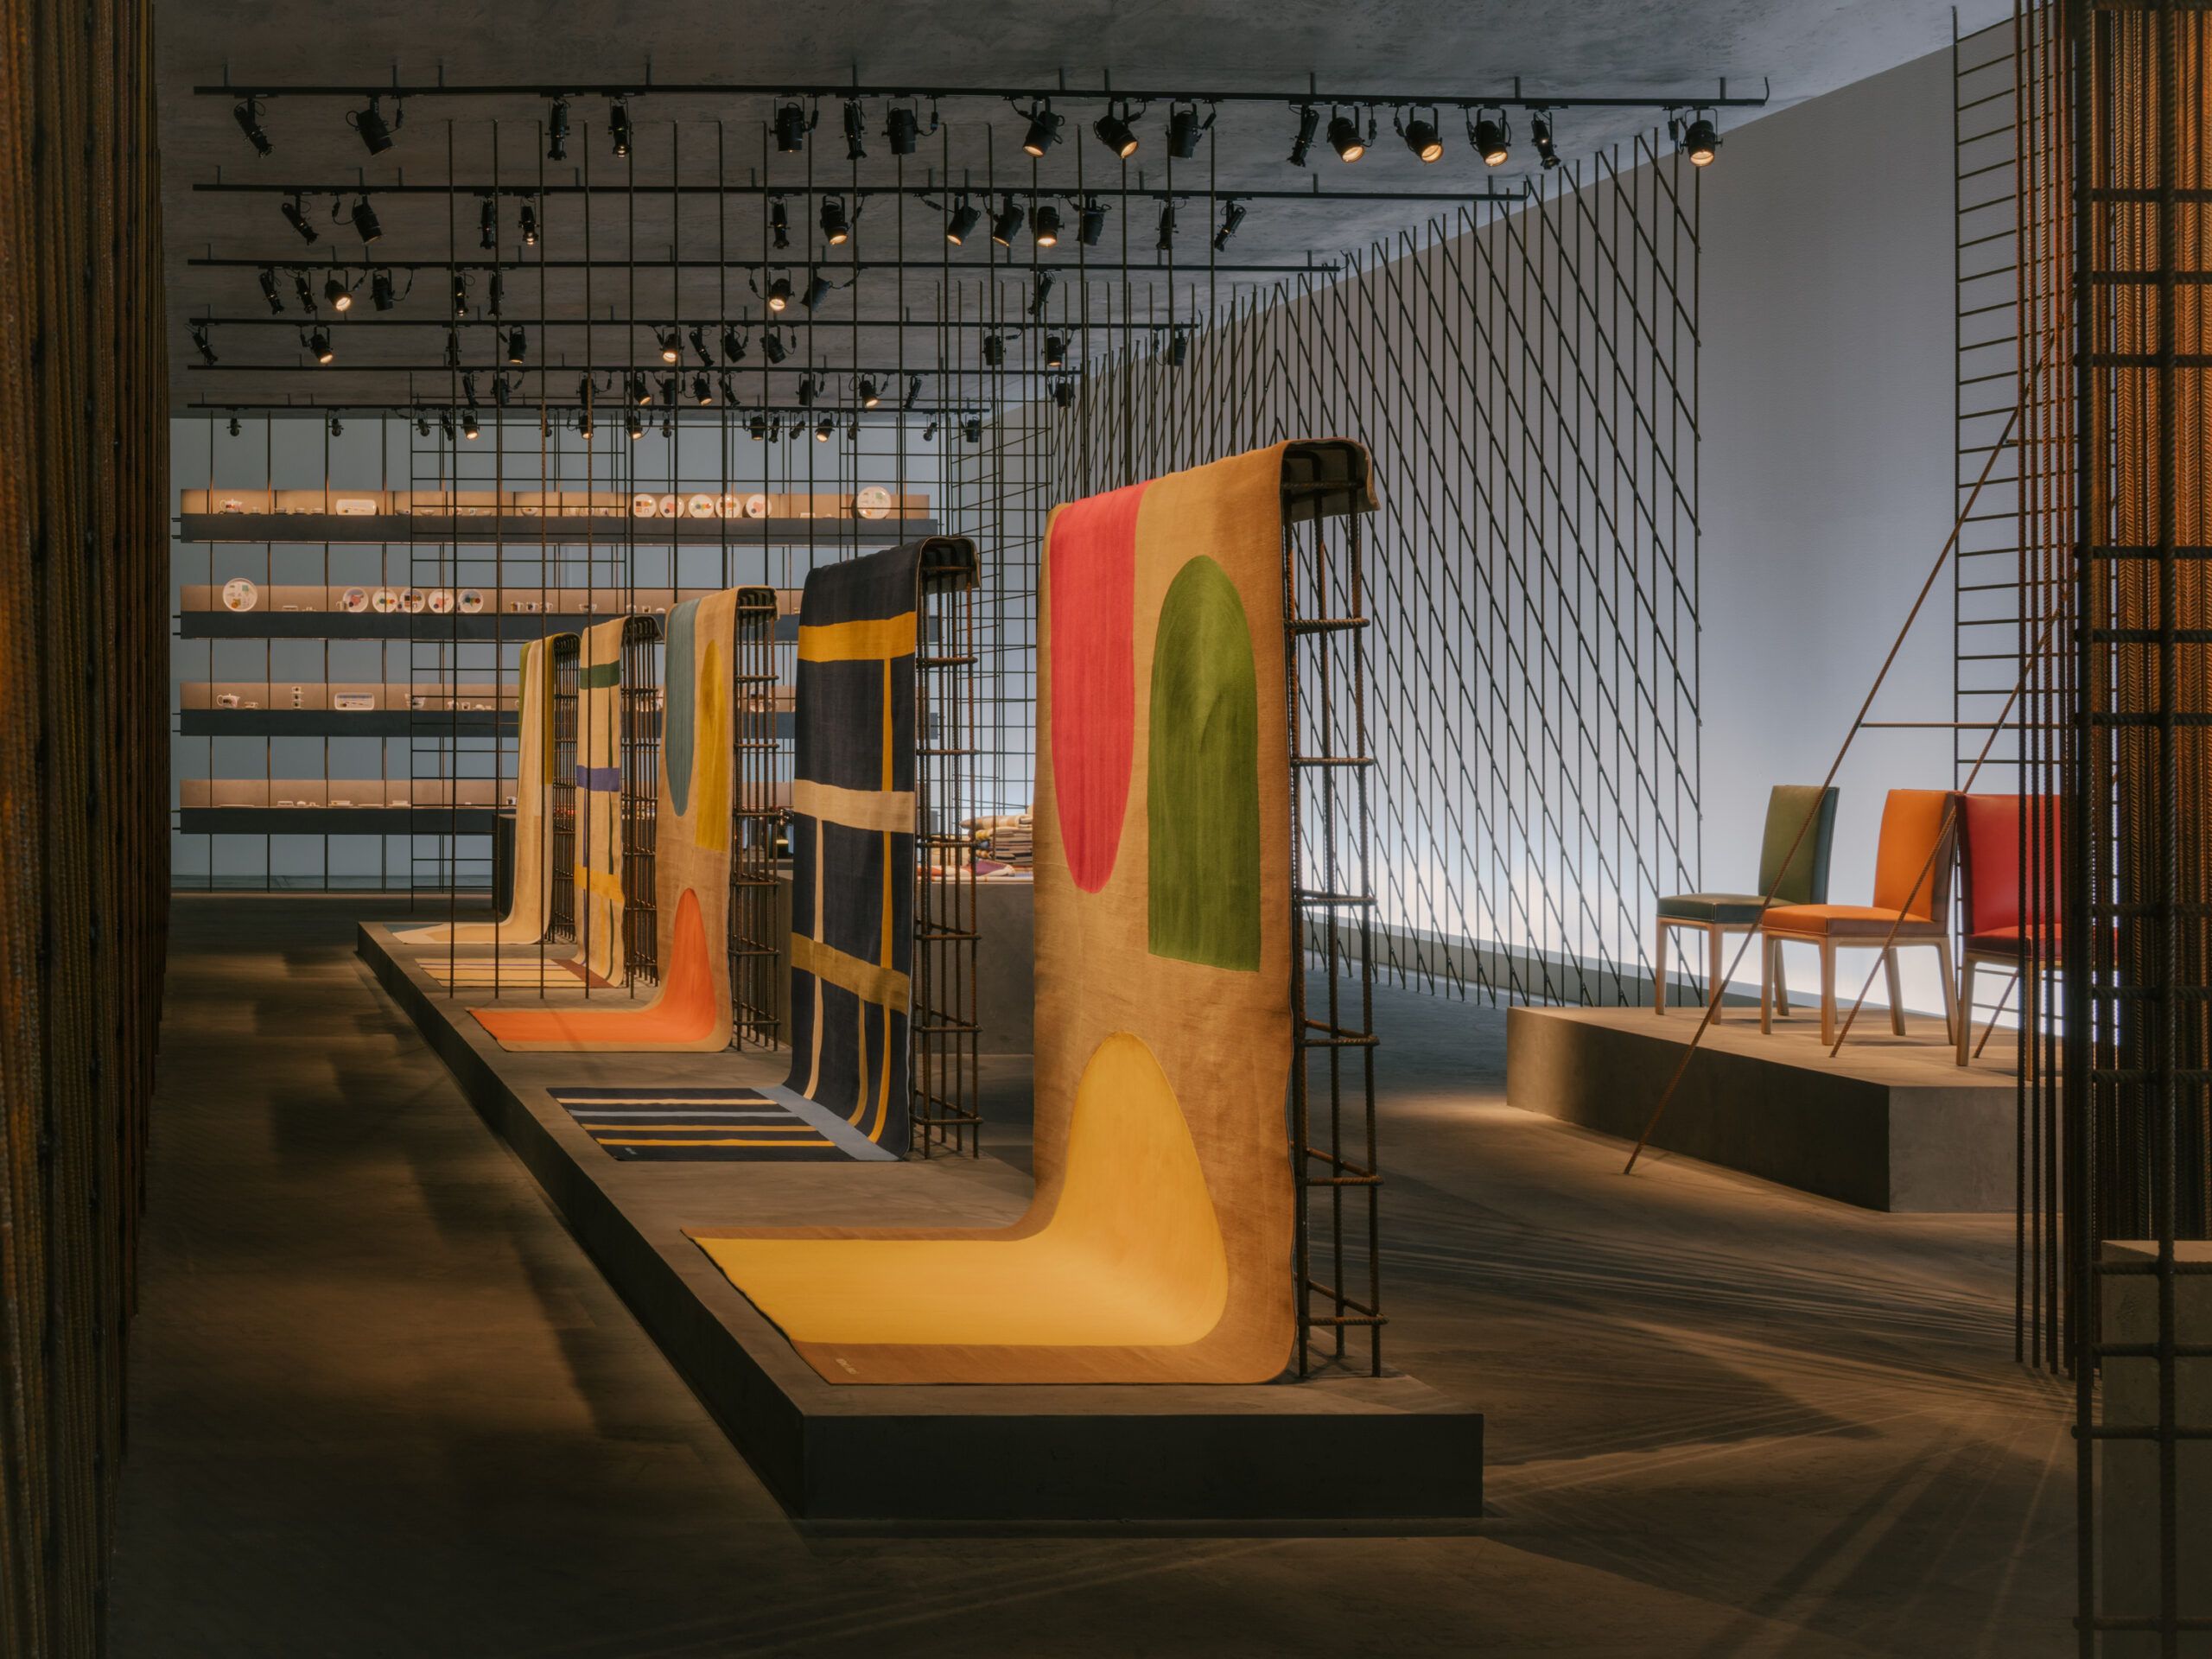 Our favorite moments from Milan Design Week 2022: The Fair